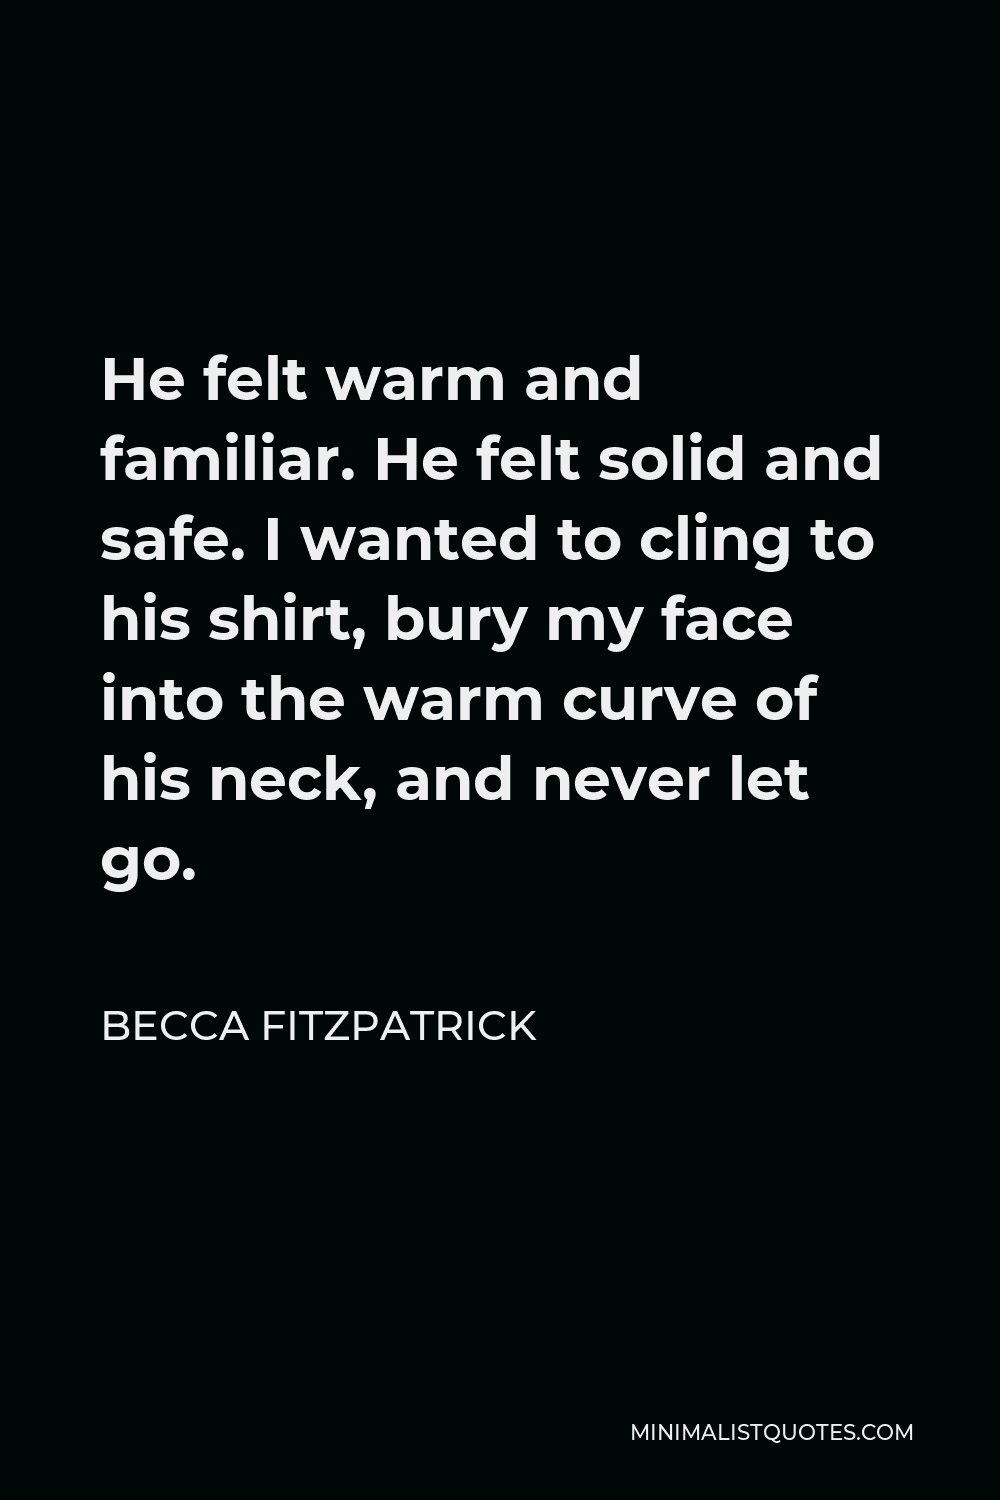 Becca Fitzpatrick Quote - He felt warm and familiar. He felt solid and safe. I wanted to cling to his shirt, bury my face into the warm curve of his neck, and never let go.